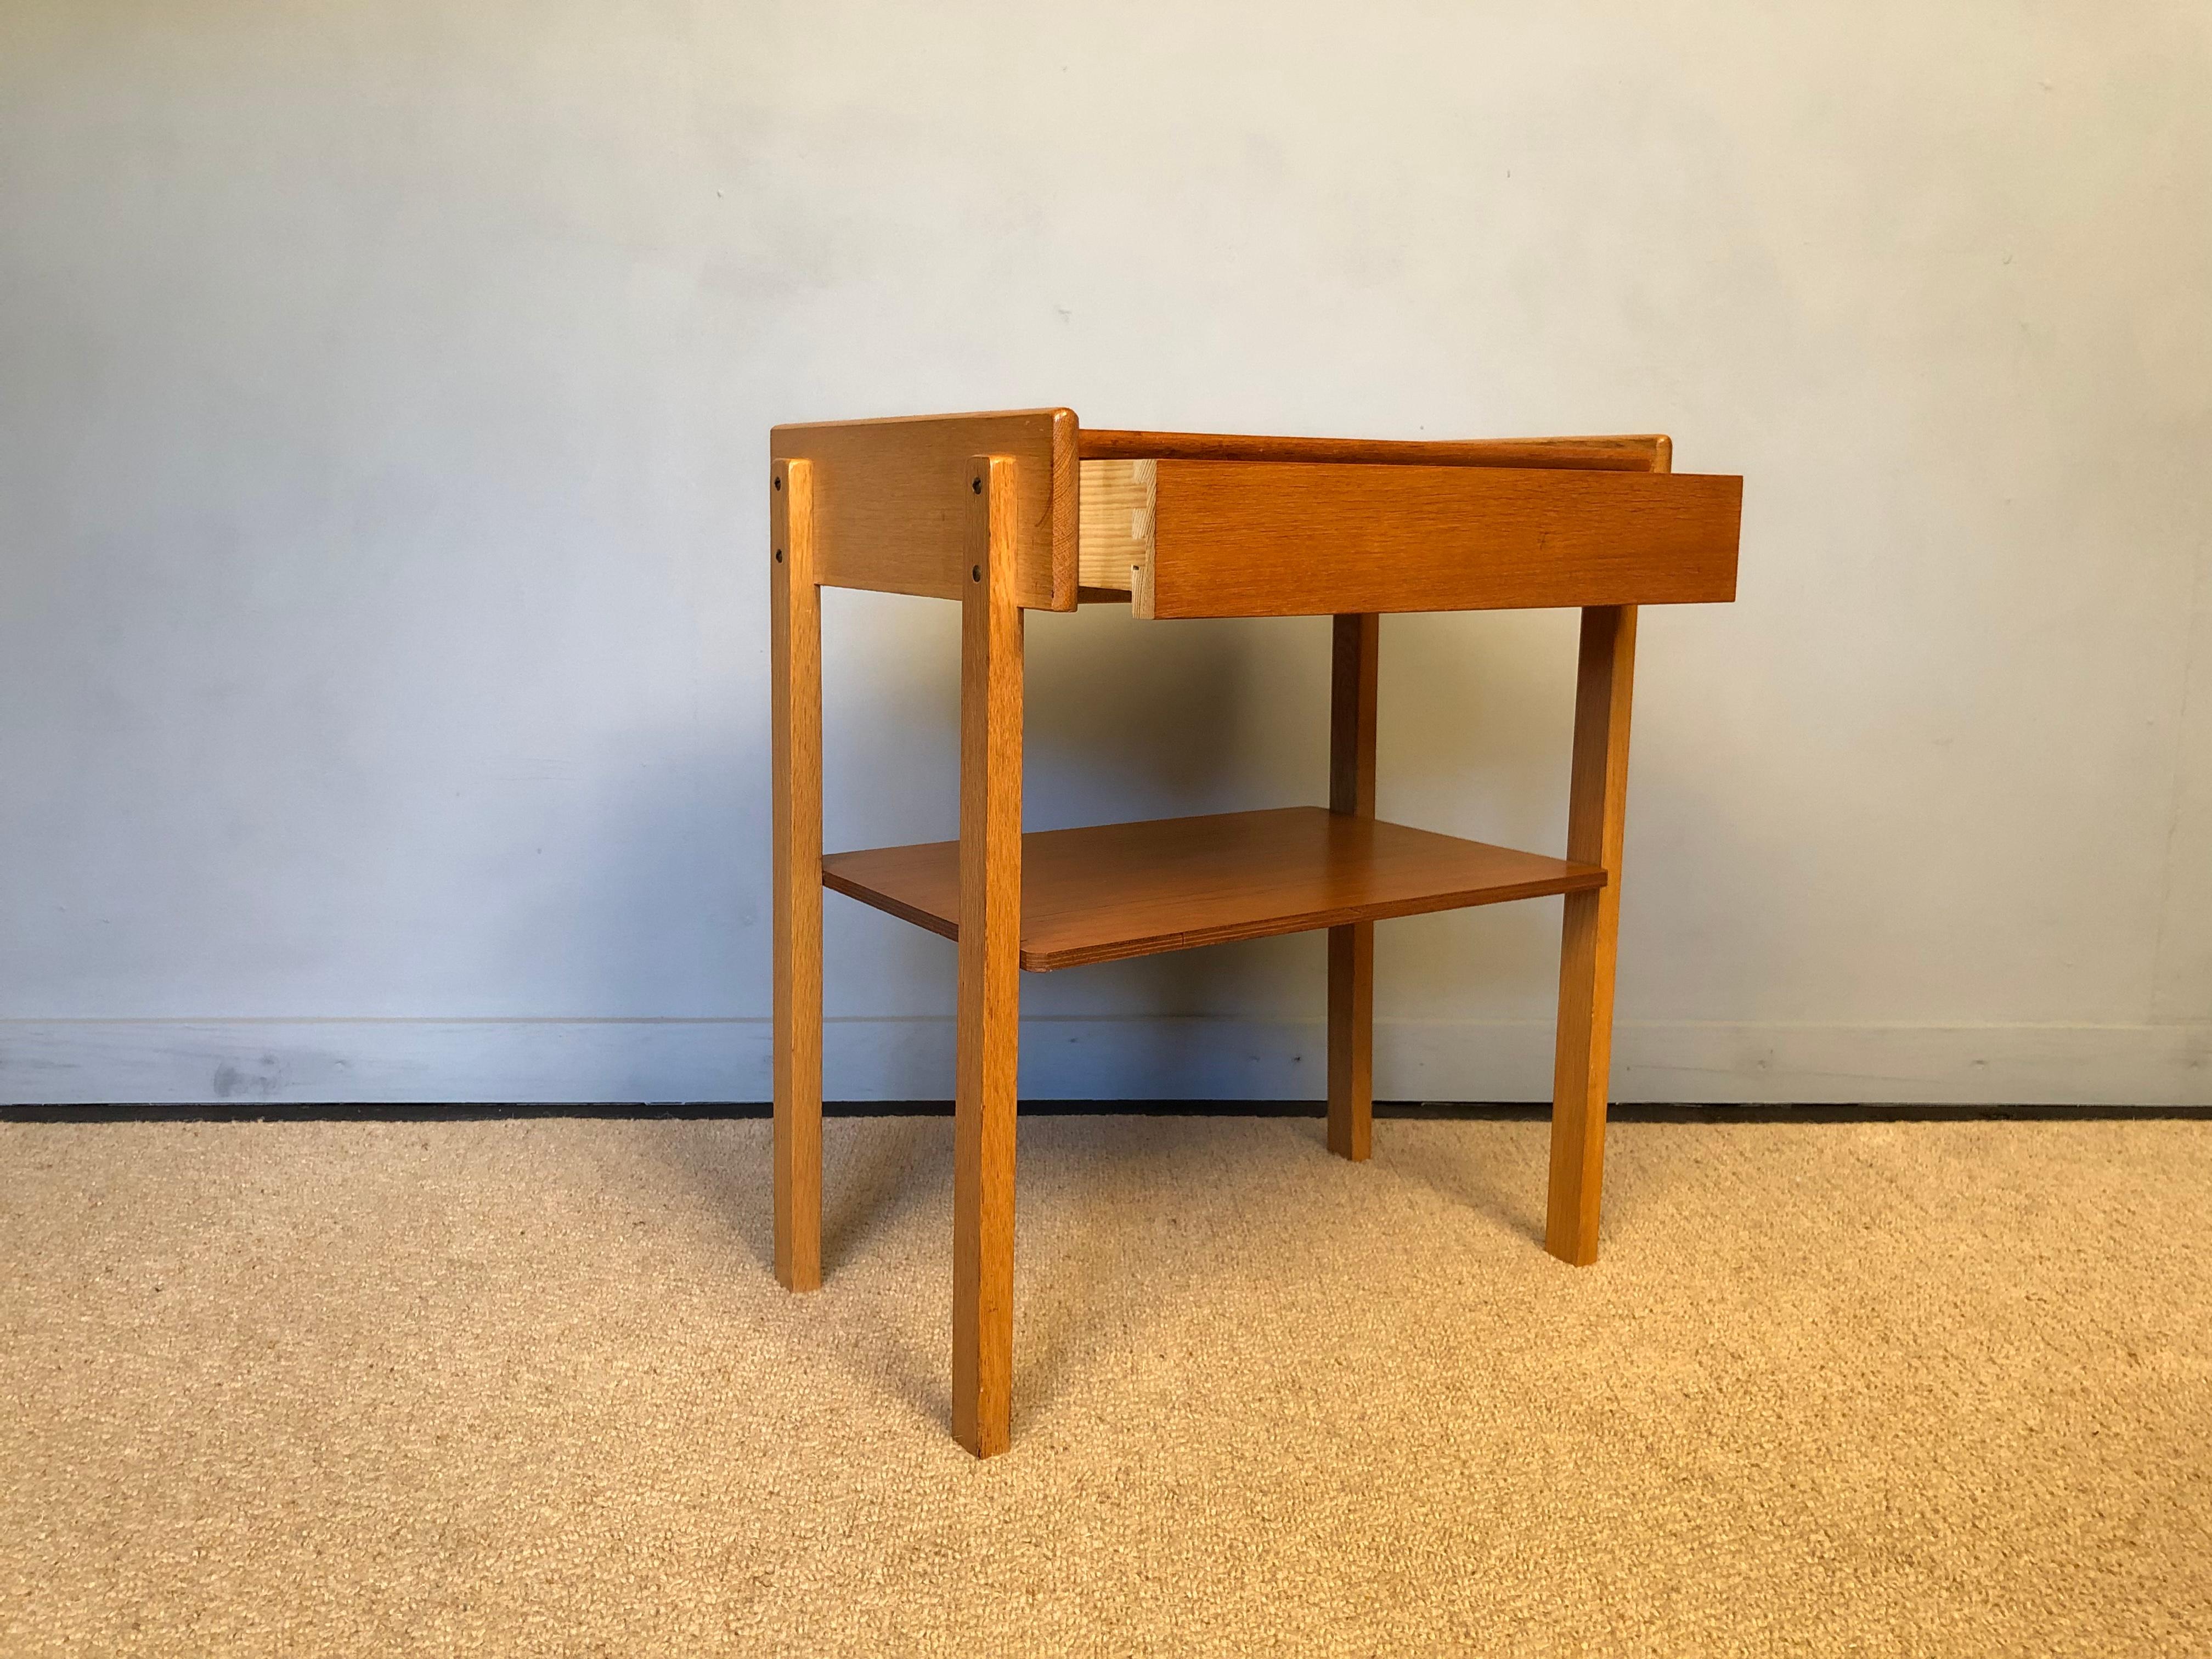 Pair of Danish midcentury nightstands/end tables produced, circa 1960. Made from oak and teak. Thoroughly cleaned, waxed and polished. 
Nice Scandinavia minimalist  design. 